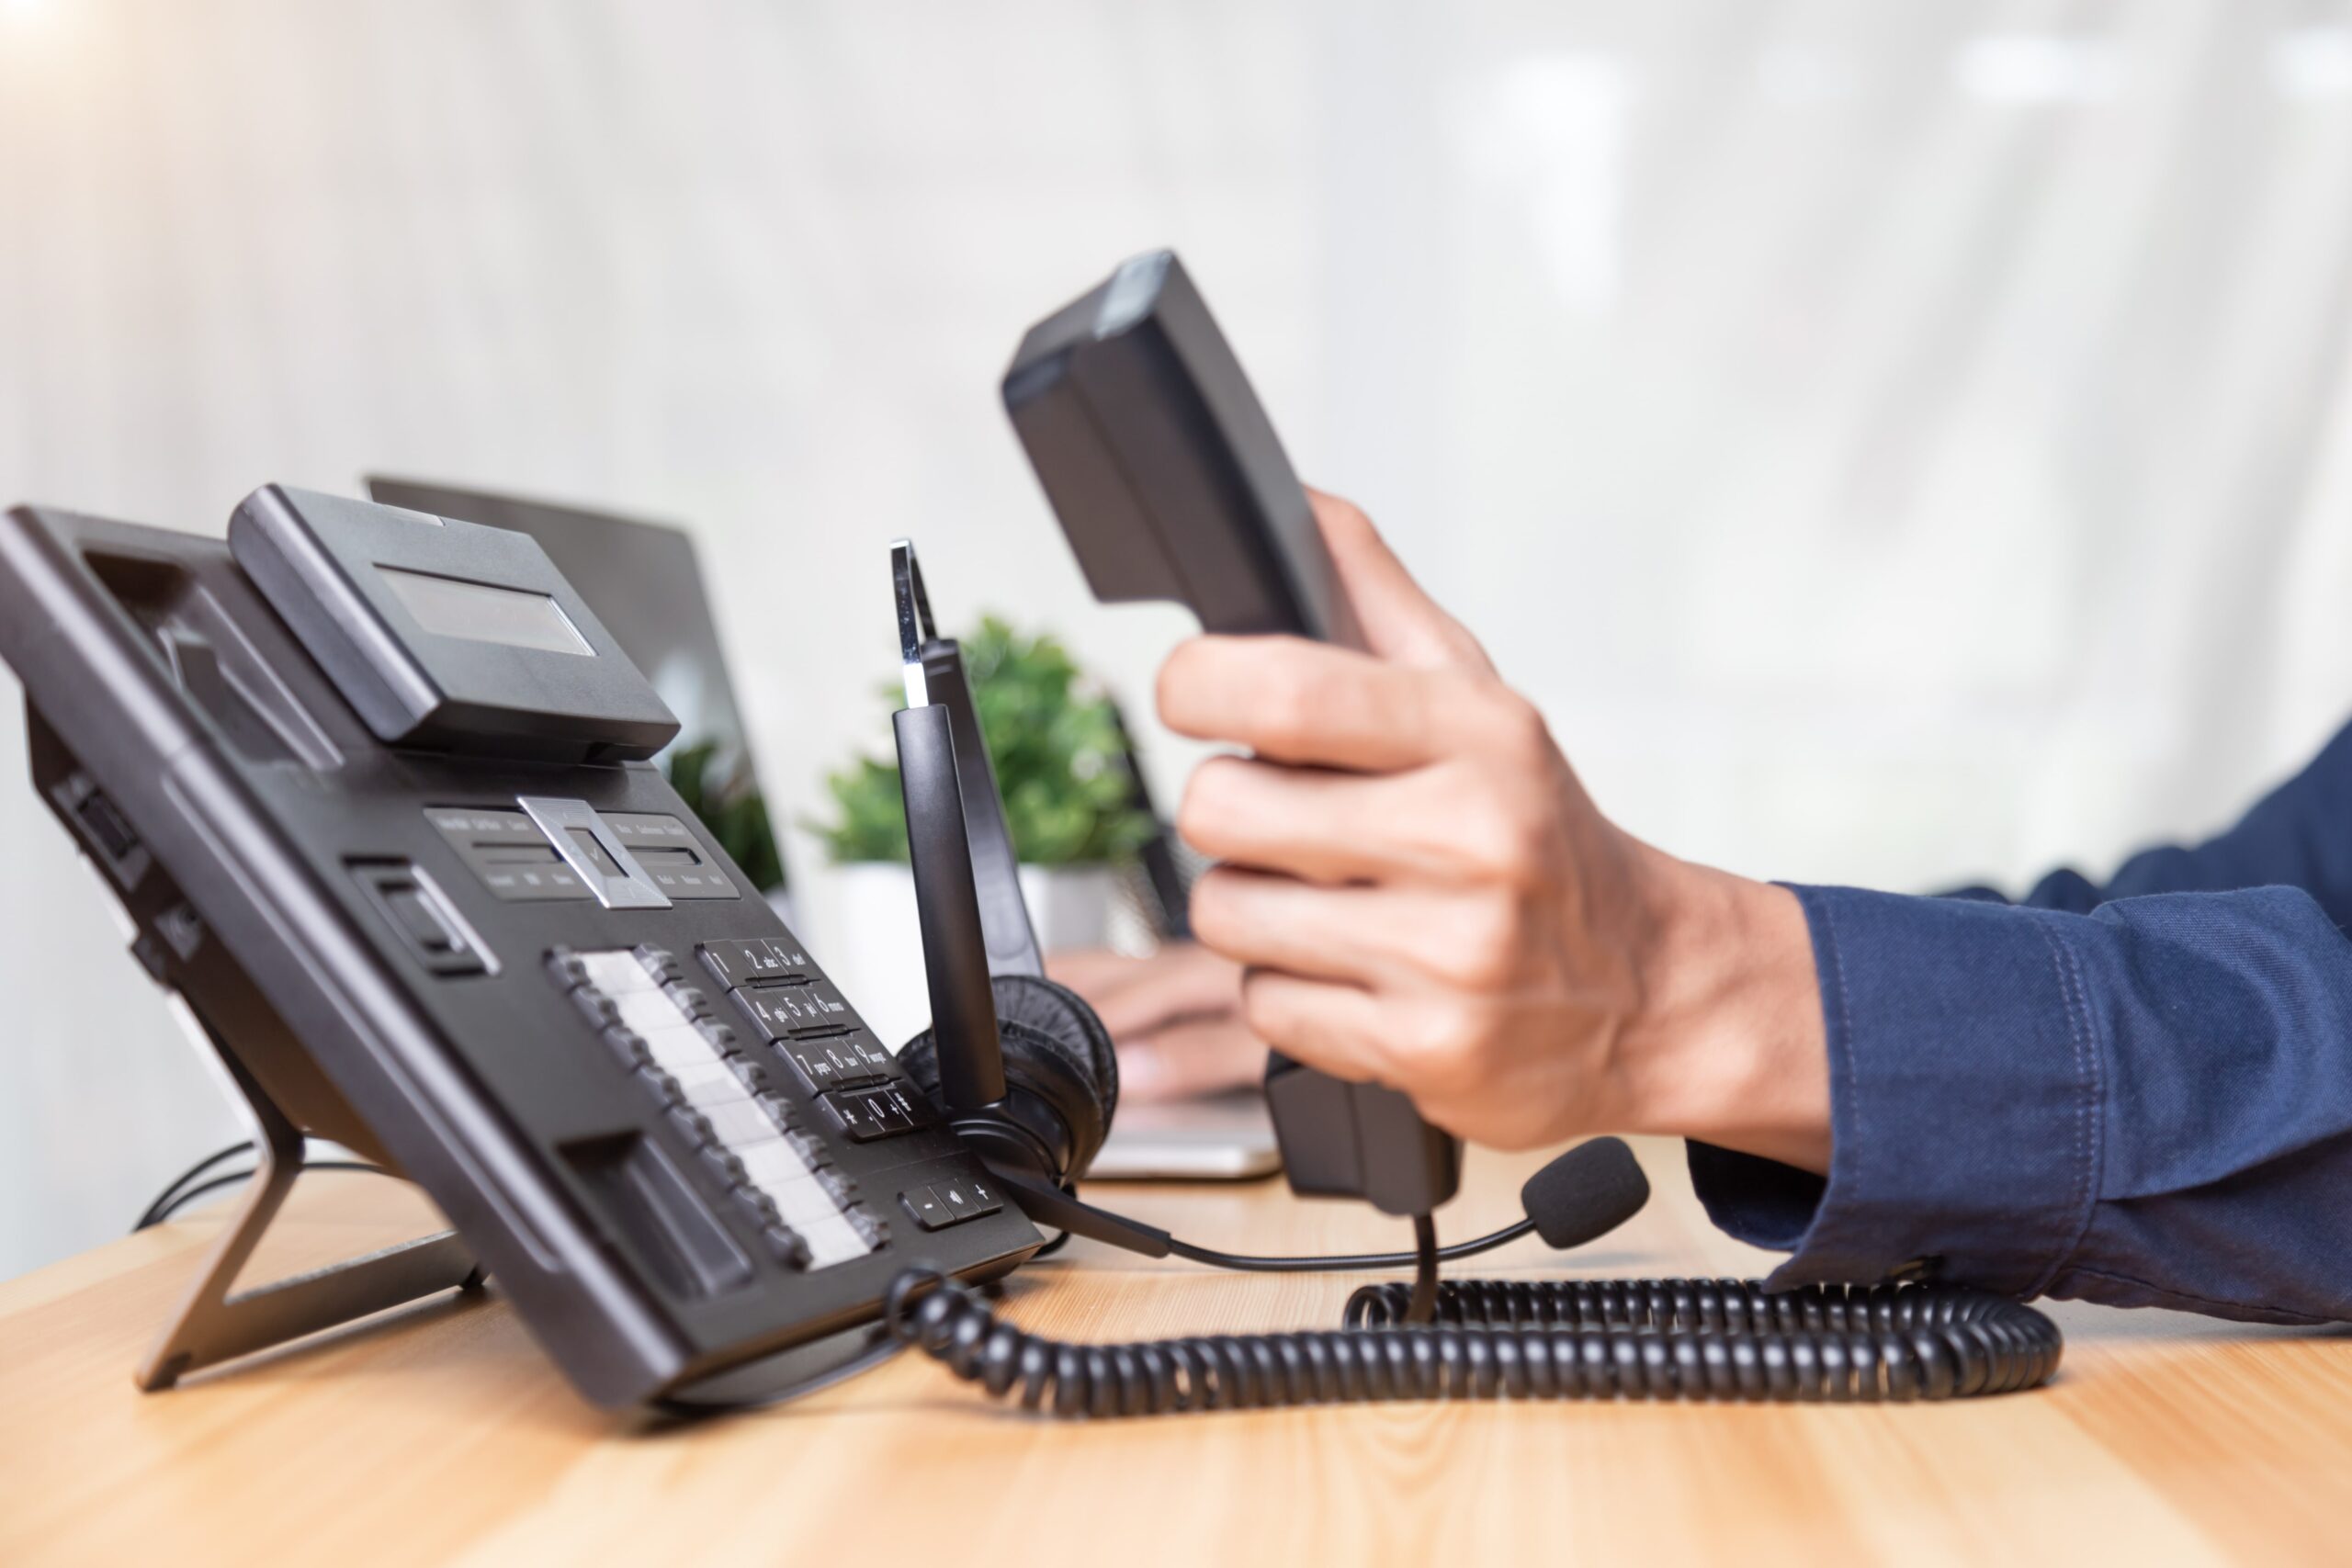 What Is a PBX Phone System?